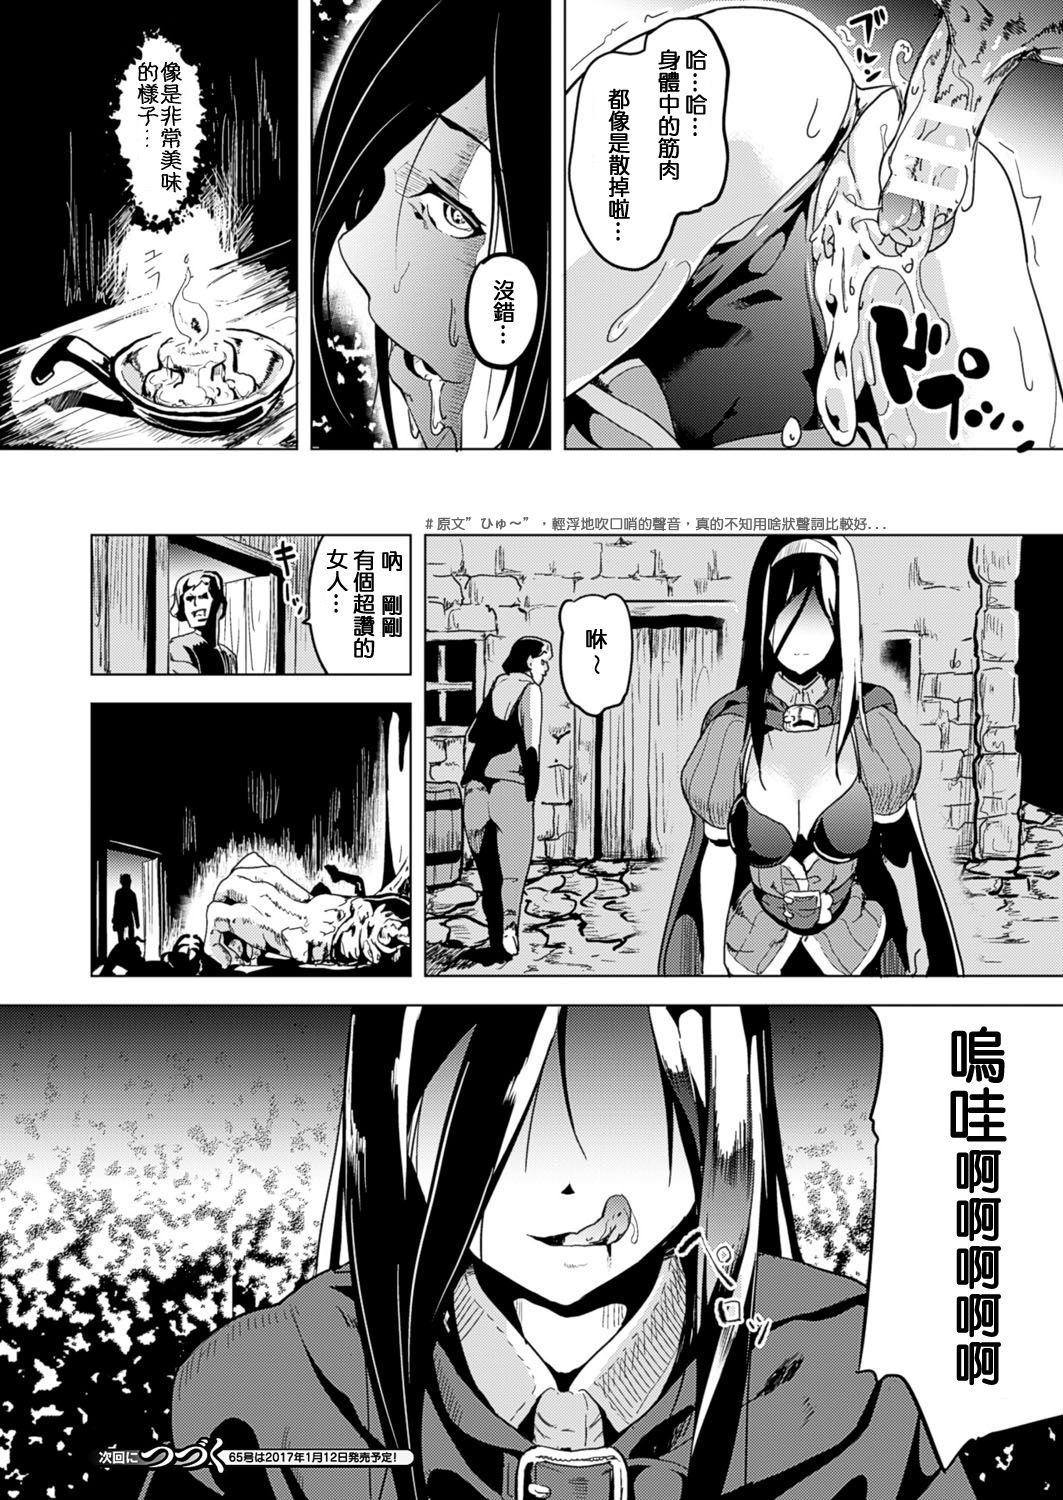 [DATE] OGRE #2 (COMIC Unreal 2016-12 Vol. 64) [Chinese] [風過迴廊個人漢化] [Digital] page 20 full